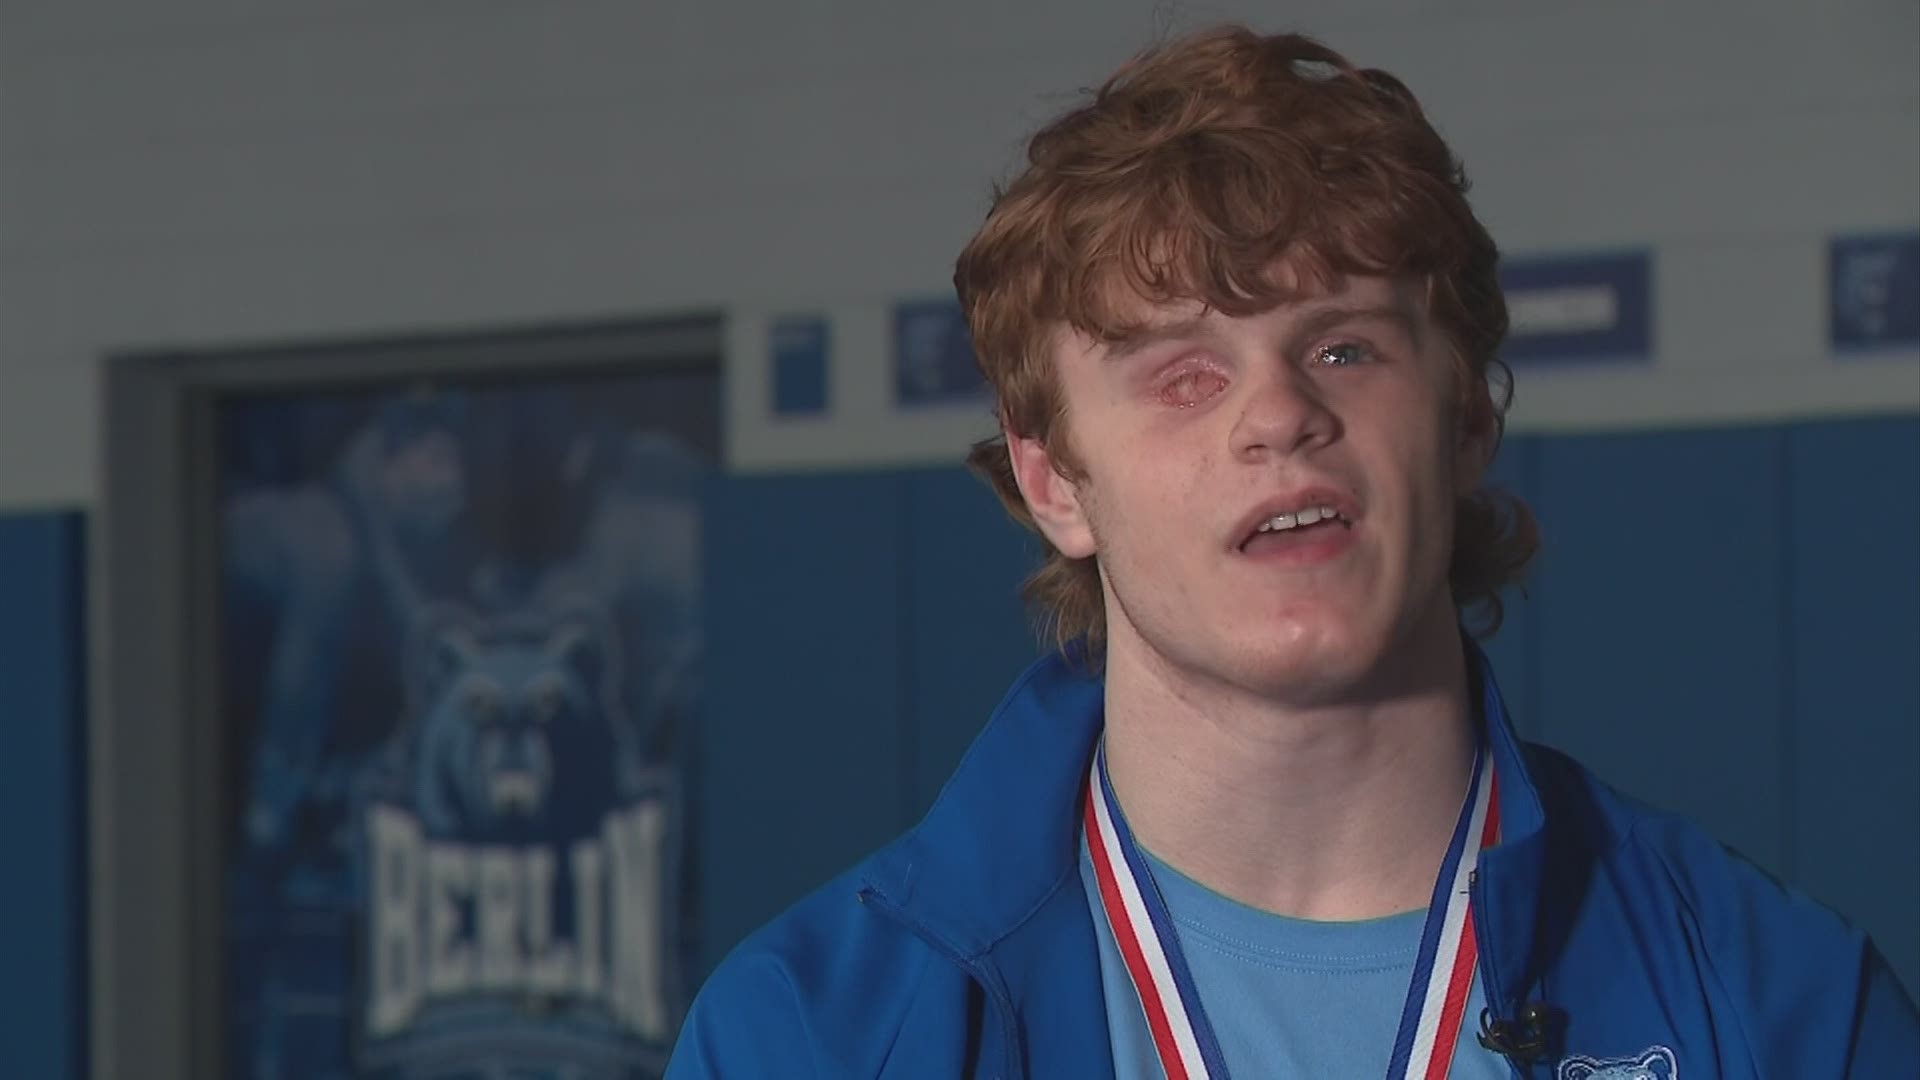 Caiden Hooks had both of his eyes removed when he was four years old after a battle with cancer. Now, he's competing in the state wrestling tournament.